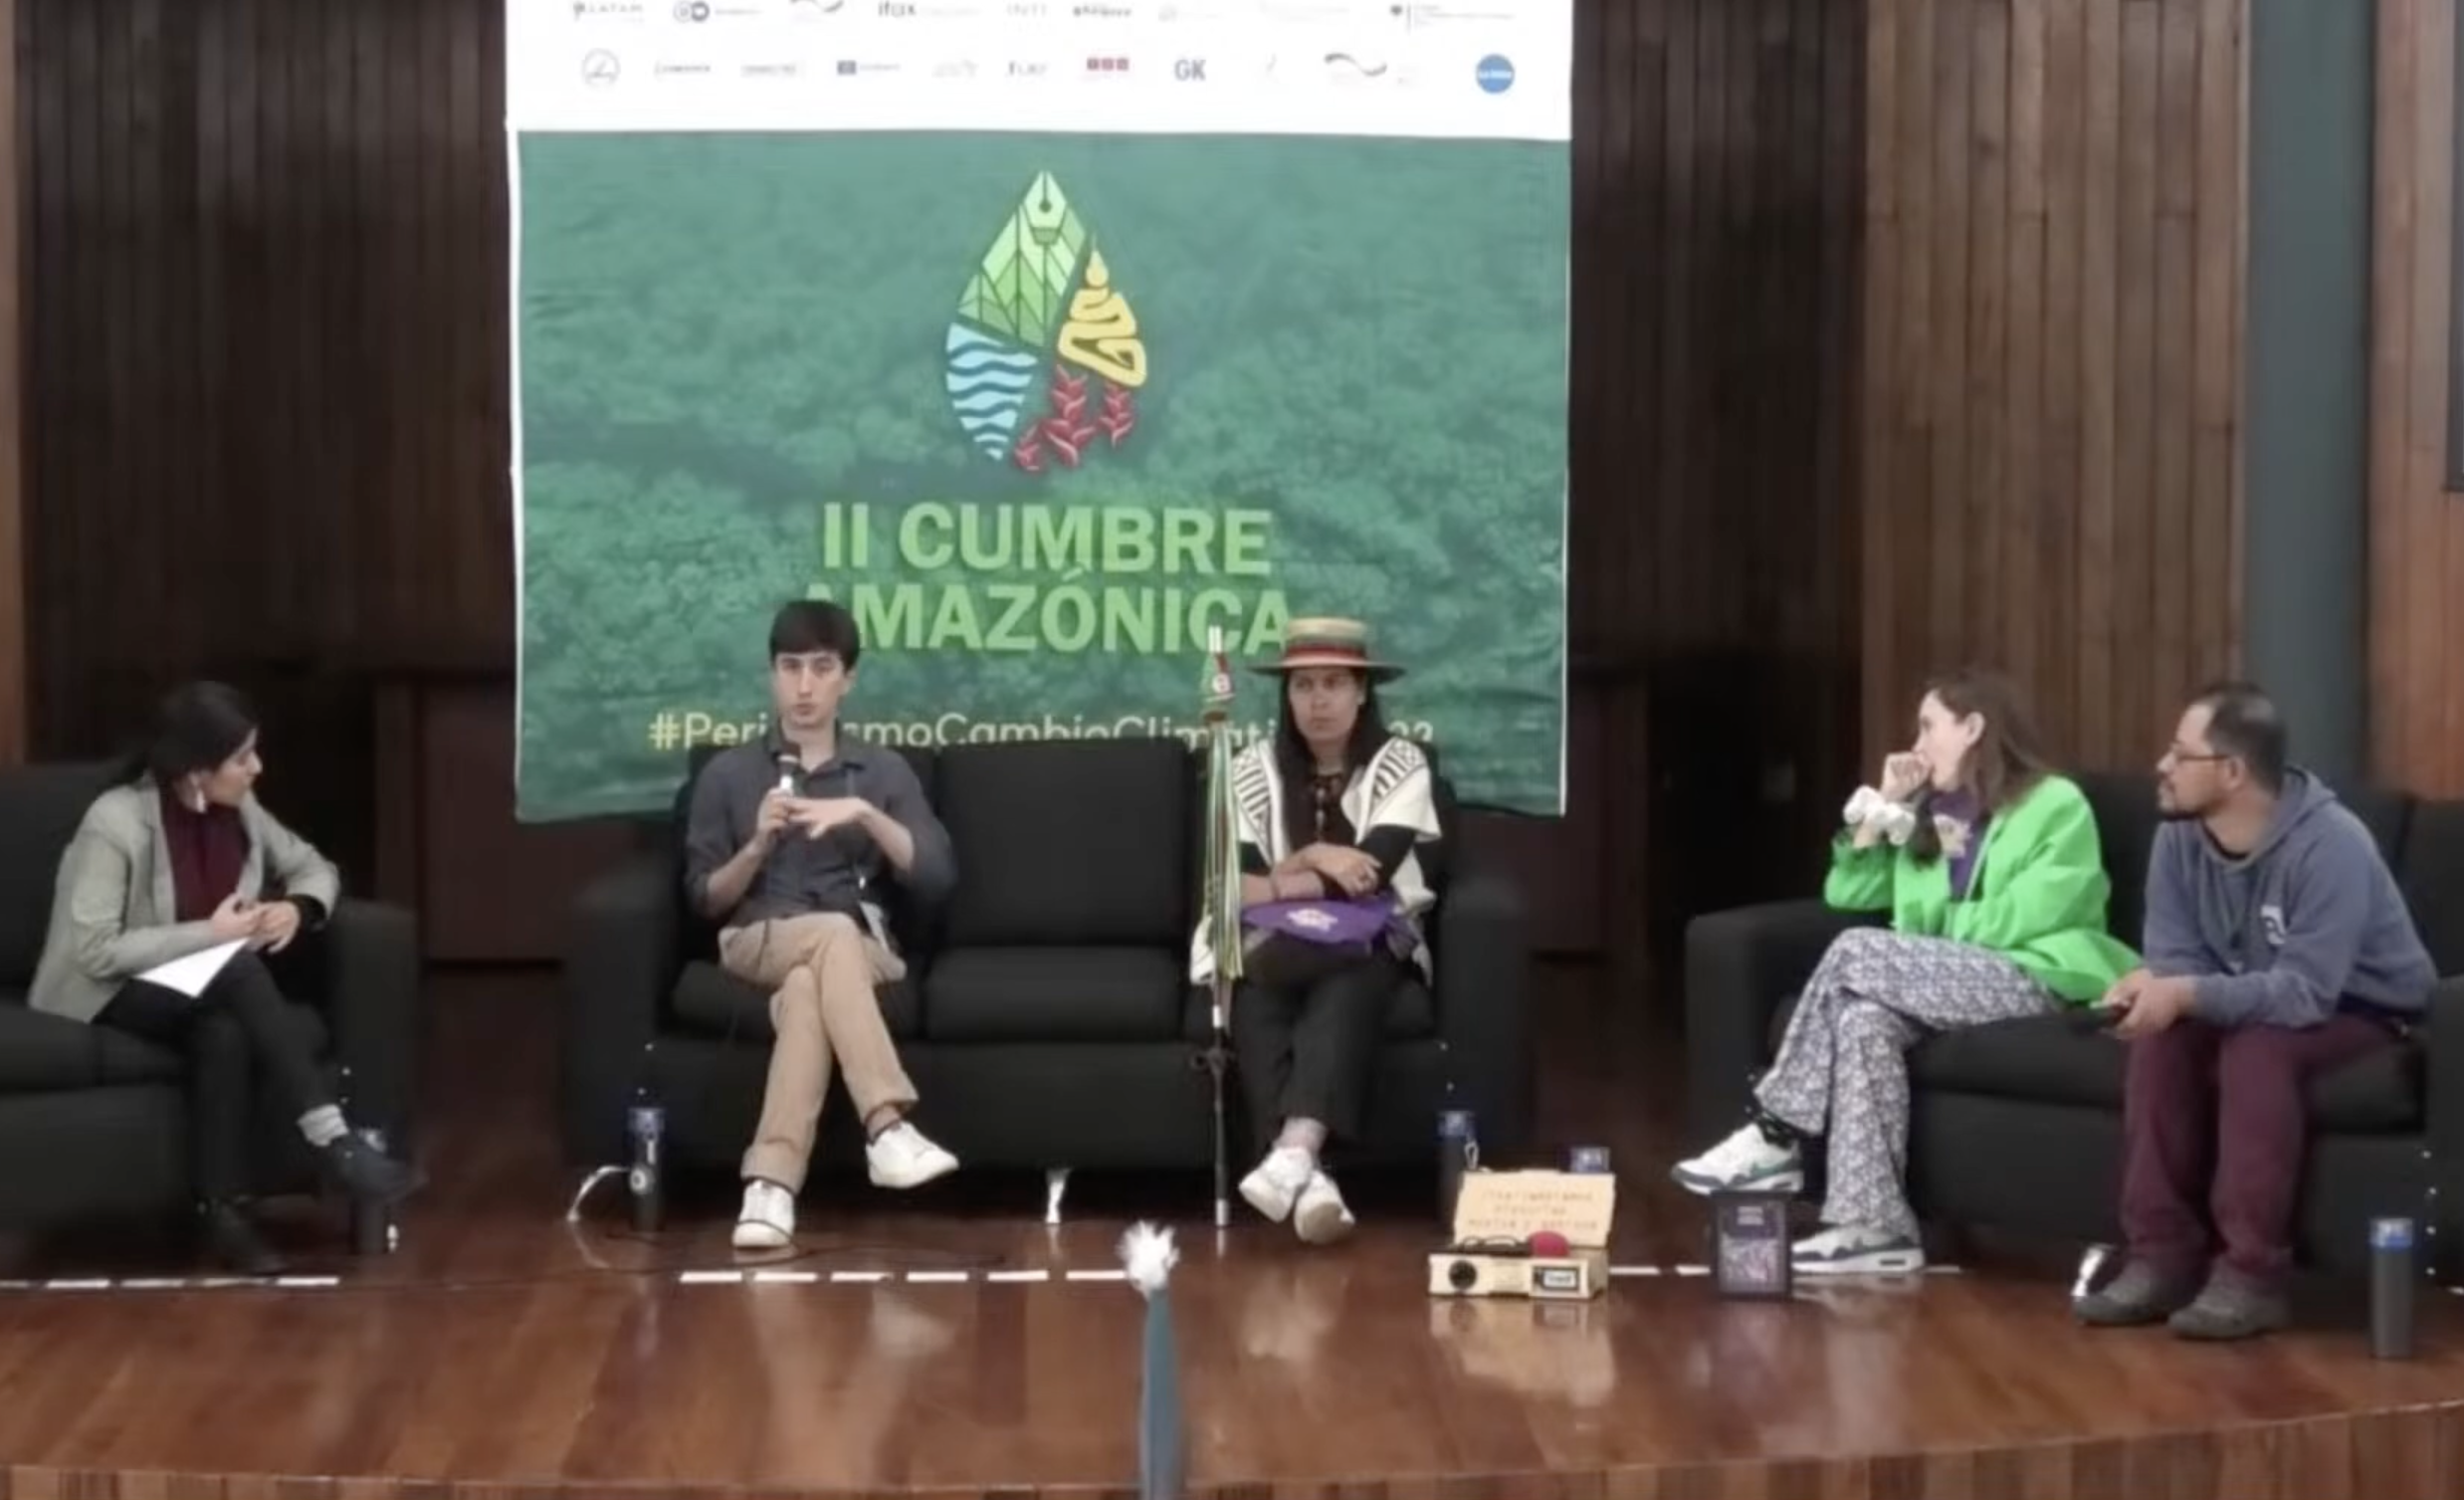 Internews Program Officer Clara, InfoAmazonia executive director Stefano Wrobleski, Indigenous leader Daniela Soto Pito, Internews program coordinator for South America Nathaly Espitia, and Asimtría web developer Marco Valdivia discuss during a panel at the II Amazon Summit on Journalism and Climate Change, in Ecuador.